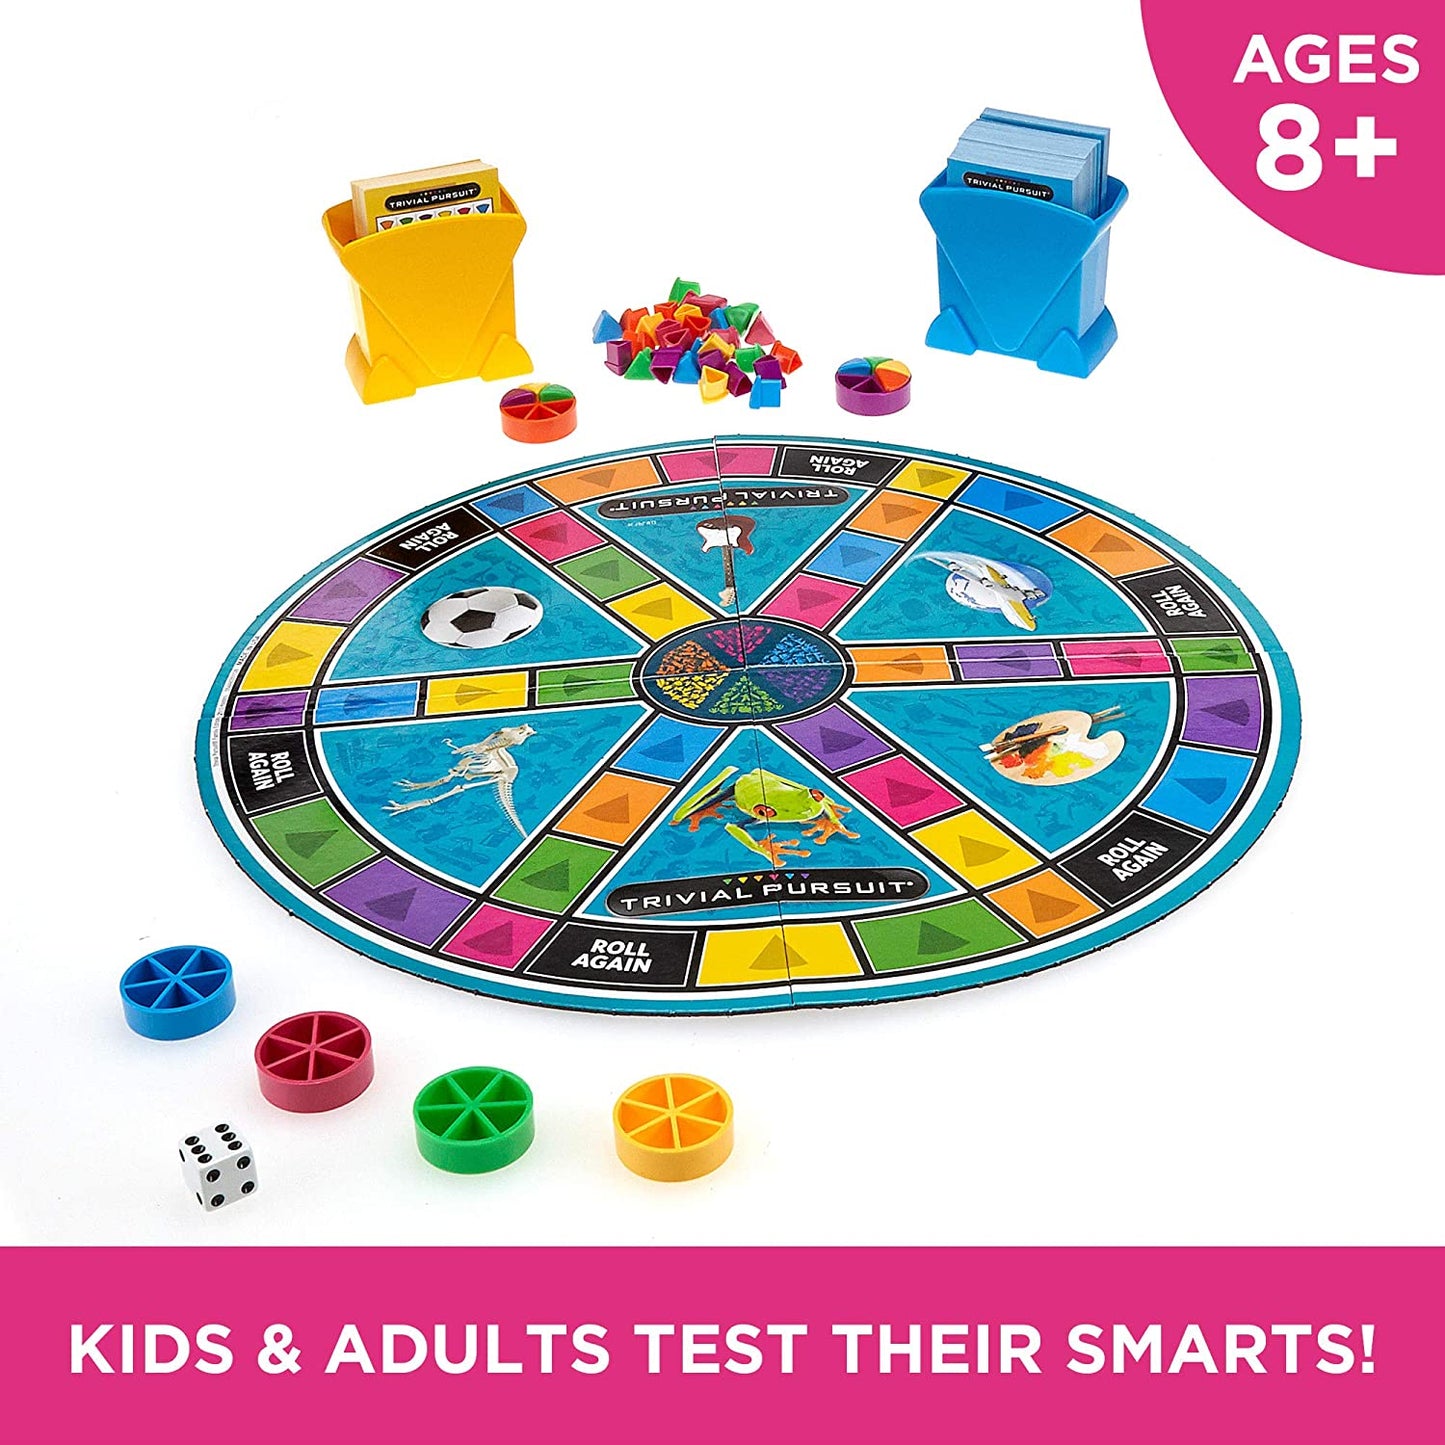 Trivial Pursuit Family Edition Game